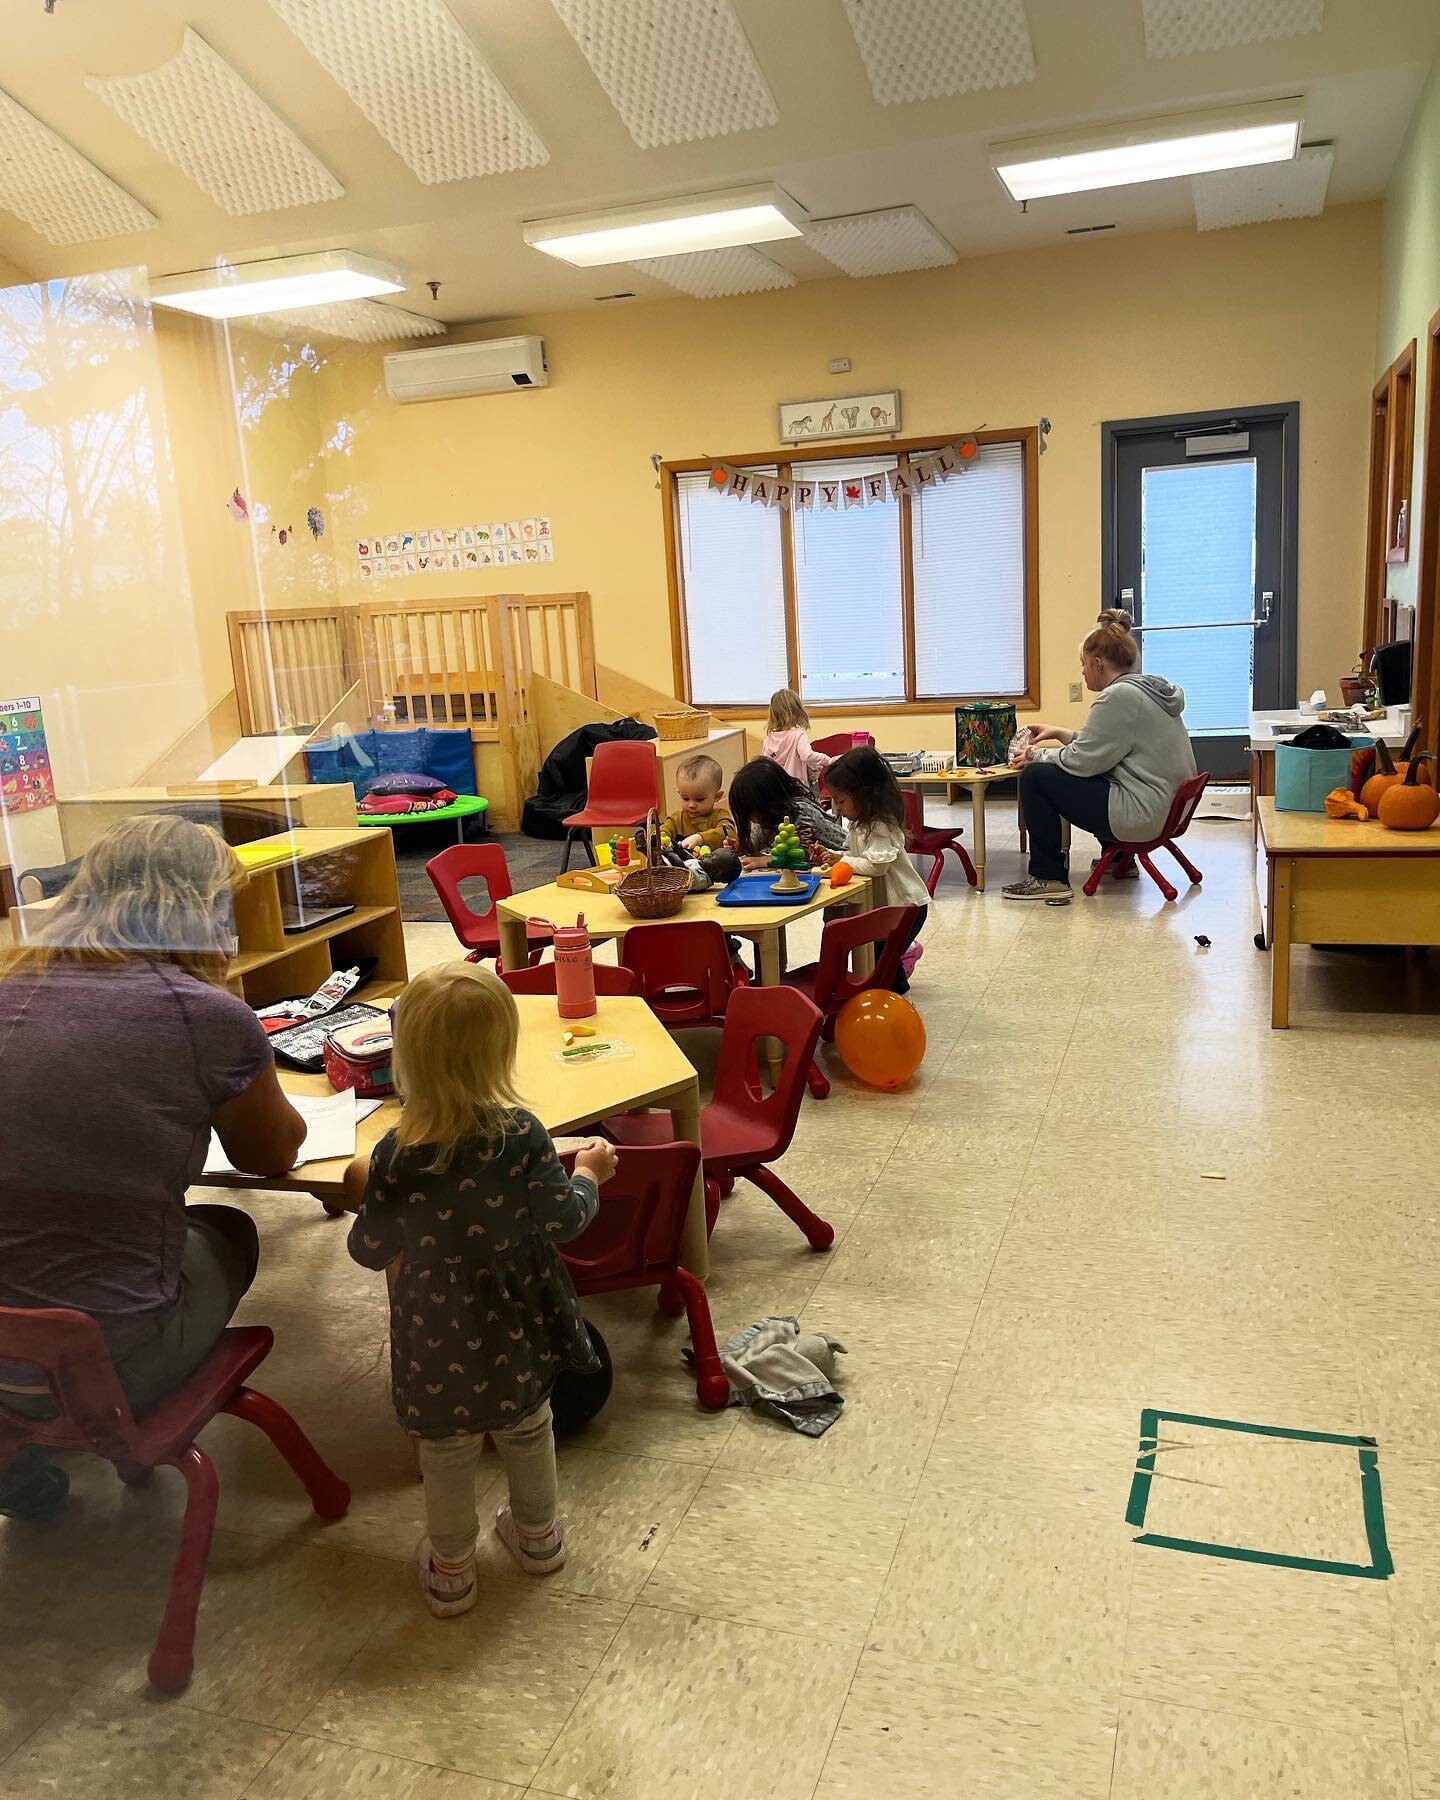 Even though we&rsquo;re peeking through a window, we can so easily see our toddlers all engaged during their morning work cycle. Look how engaged they all are!